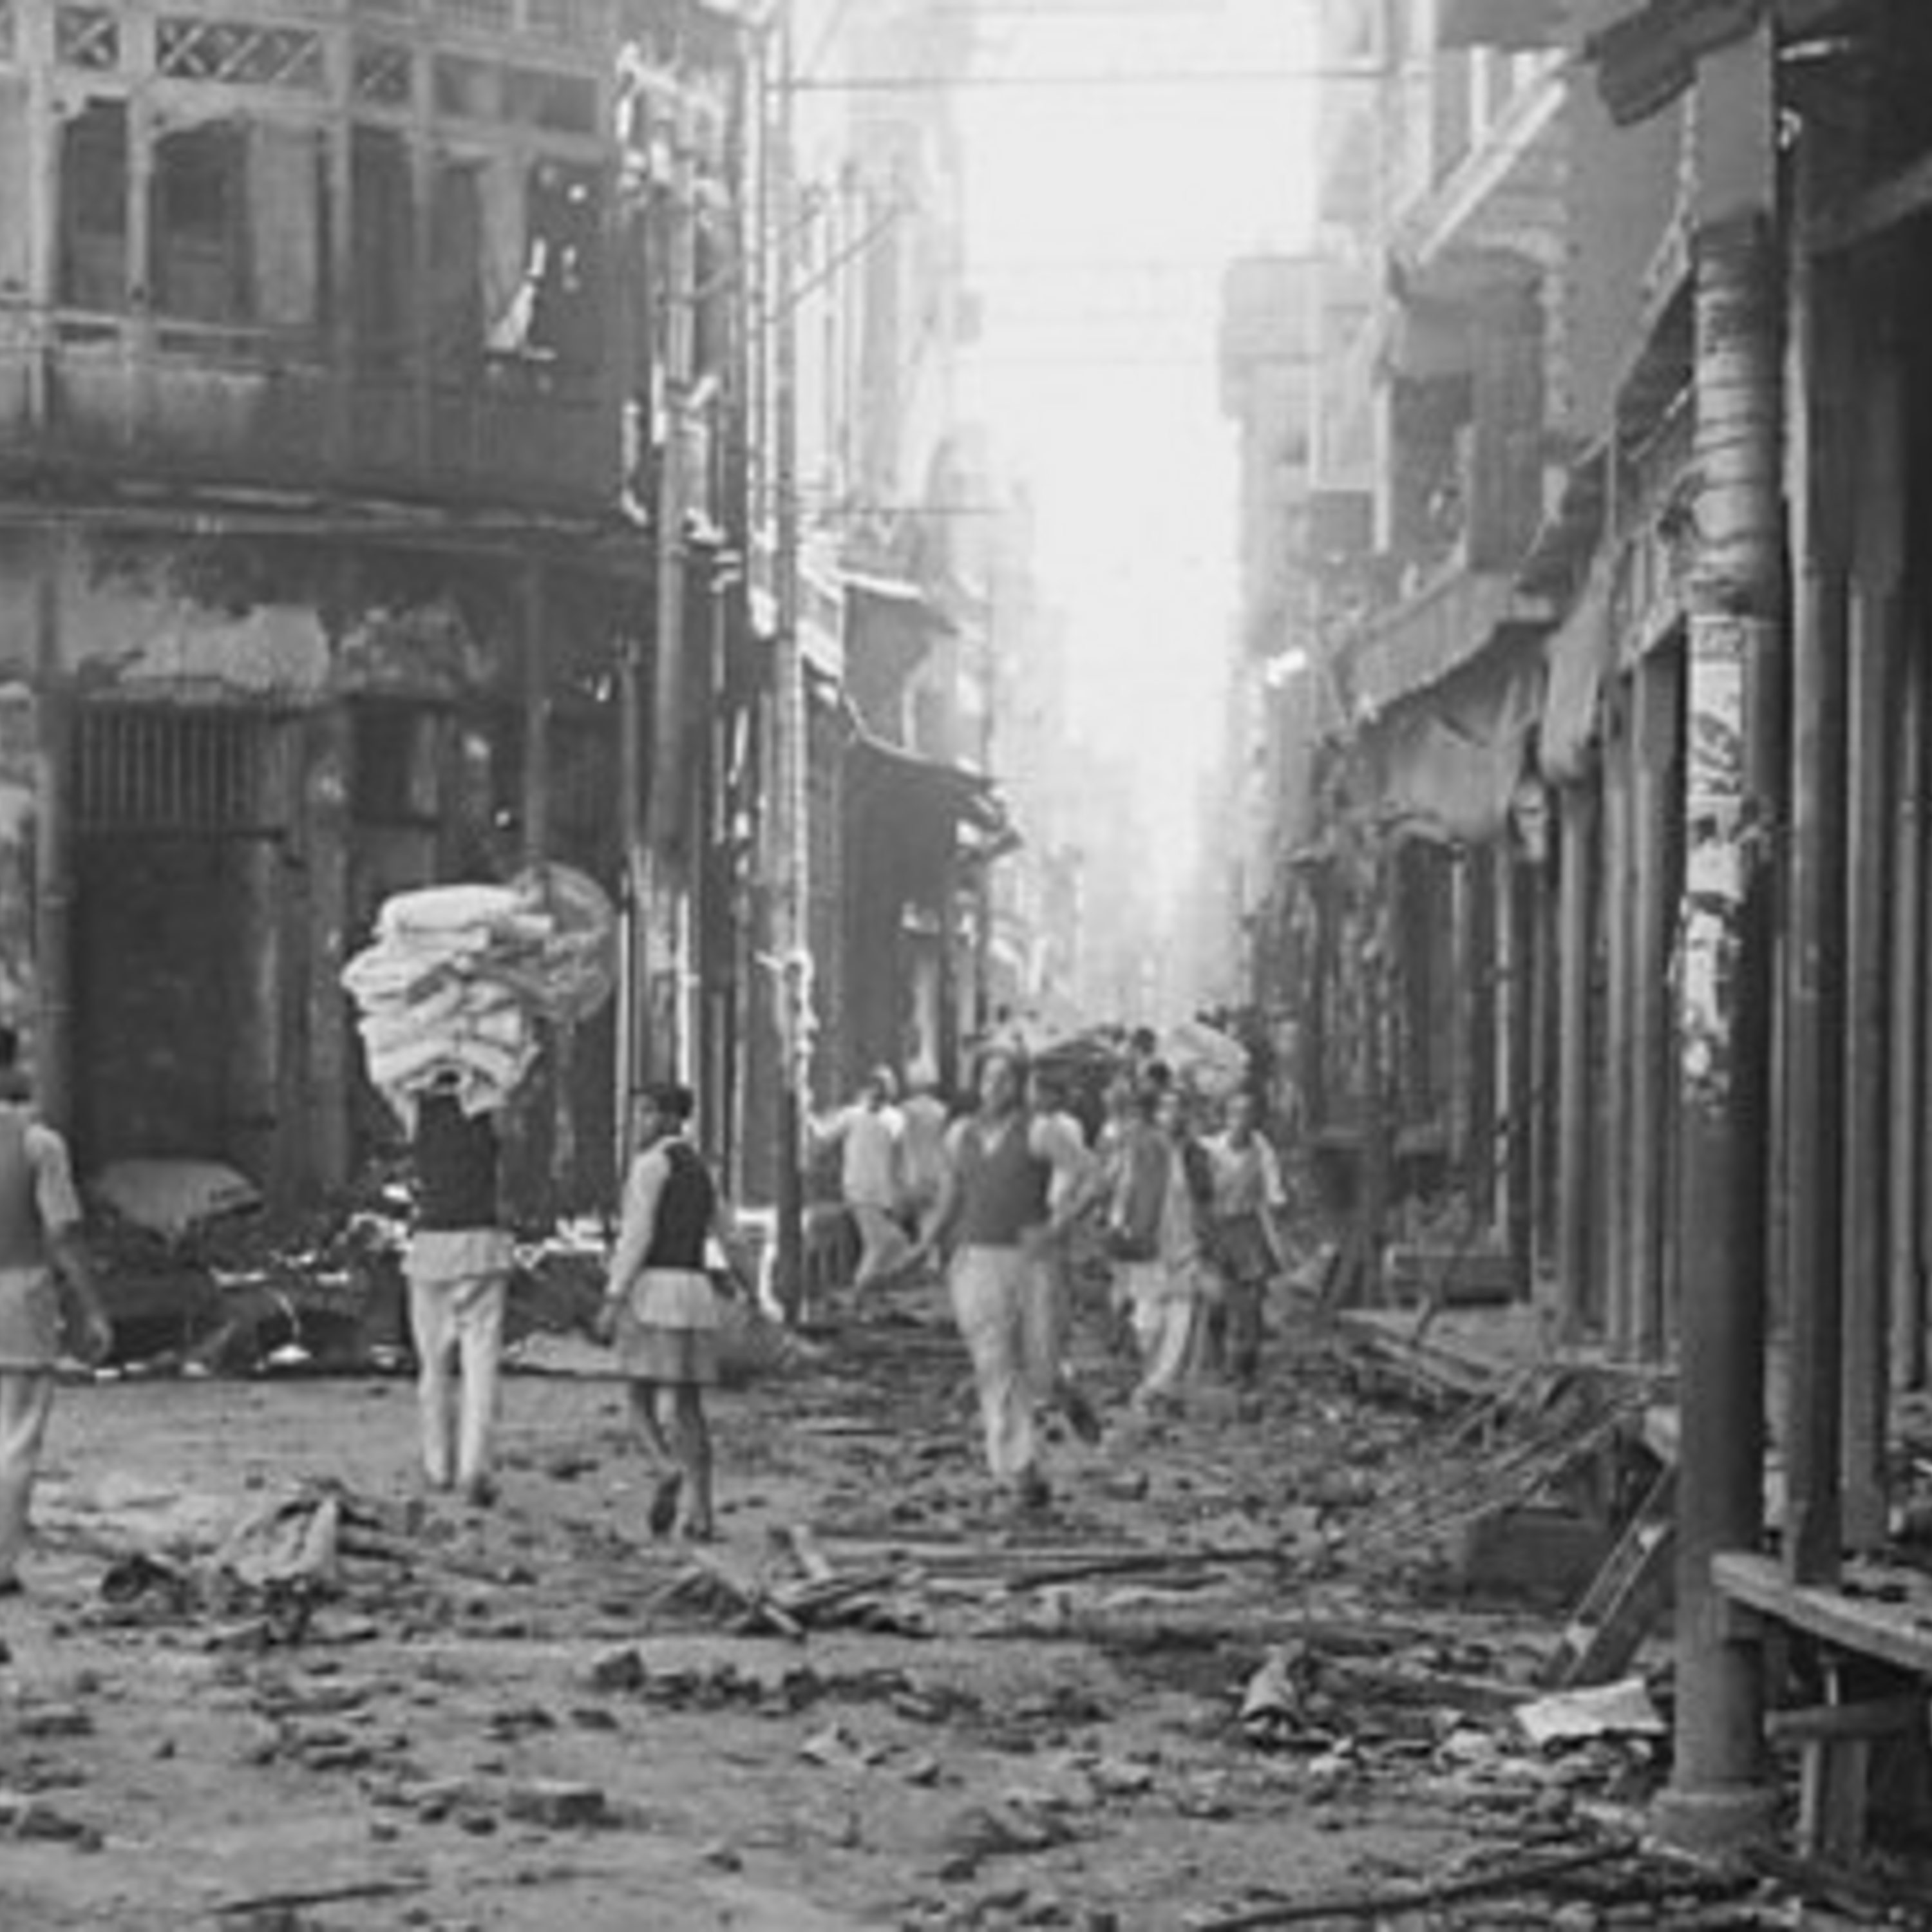 Seventy-five years since India’s Partition